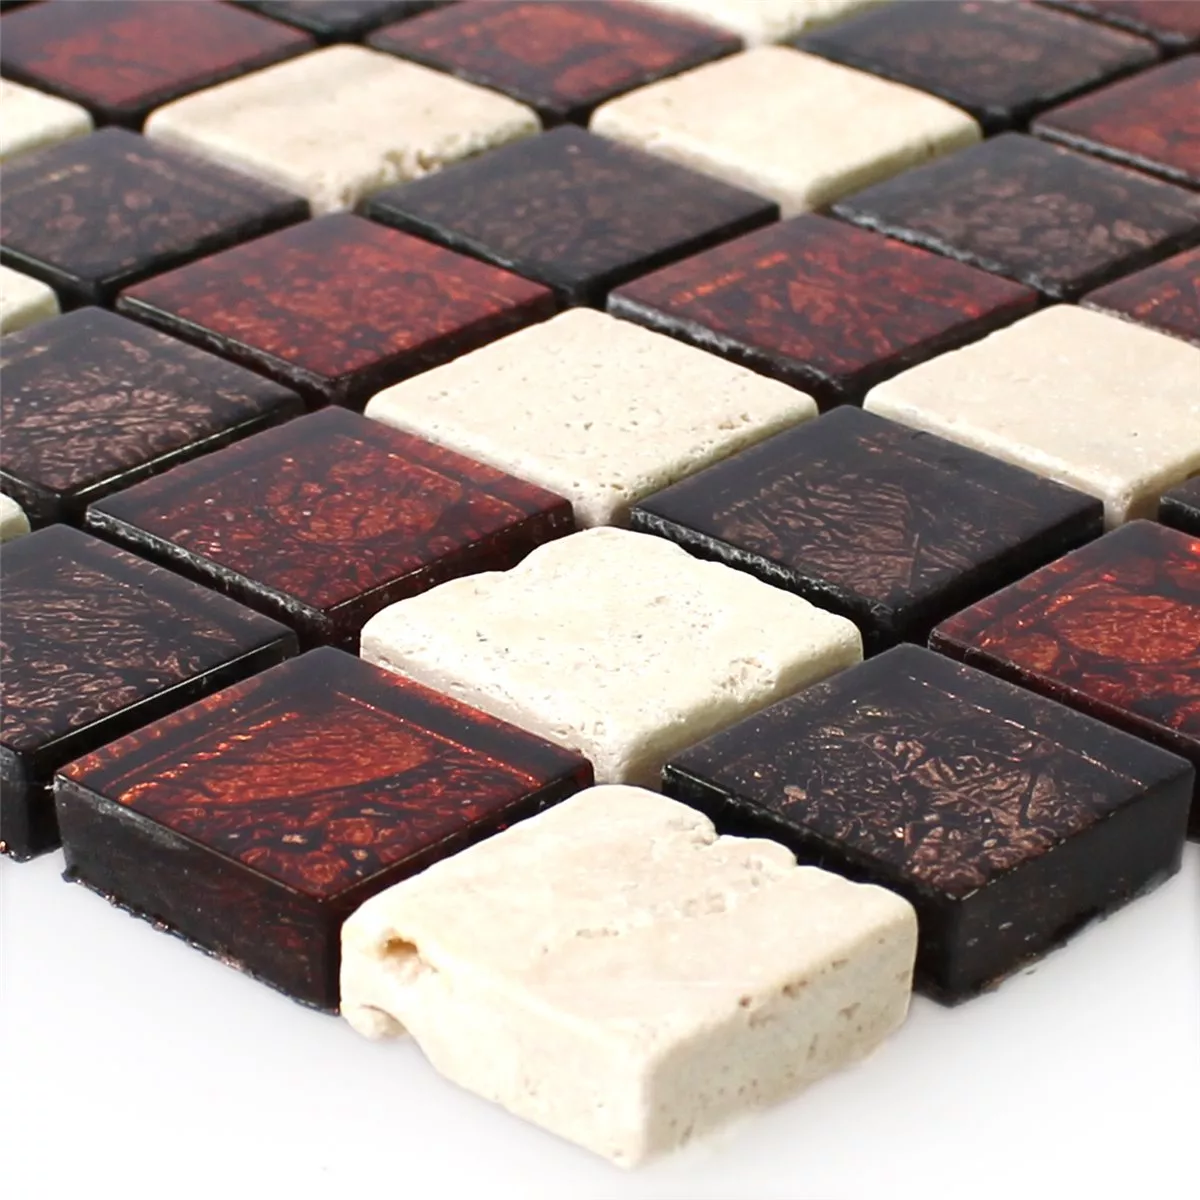 Sample Mosaic Tiles Natural Stone Glass Red Brown Beige